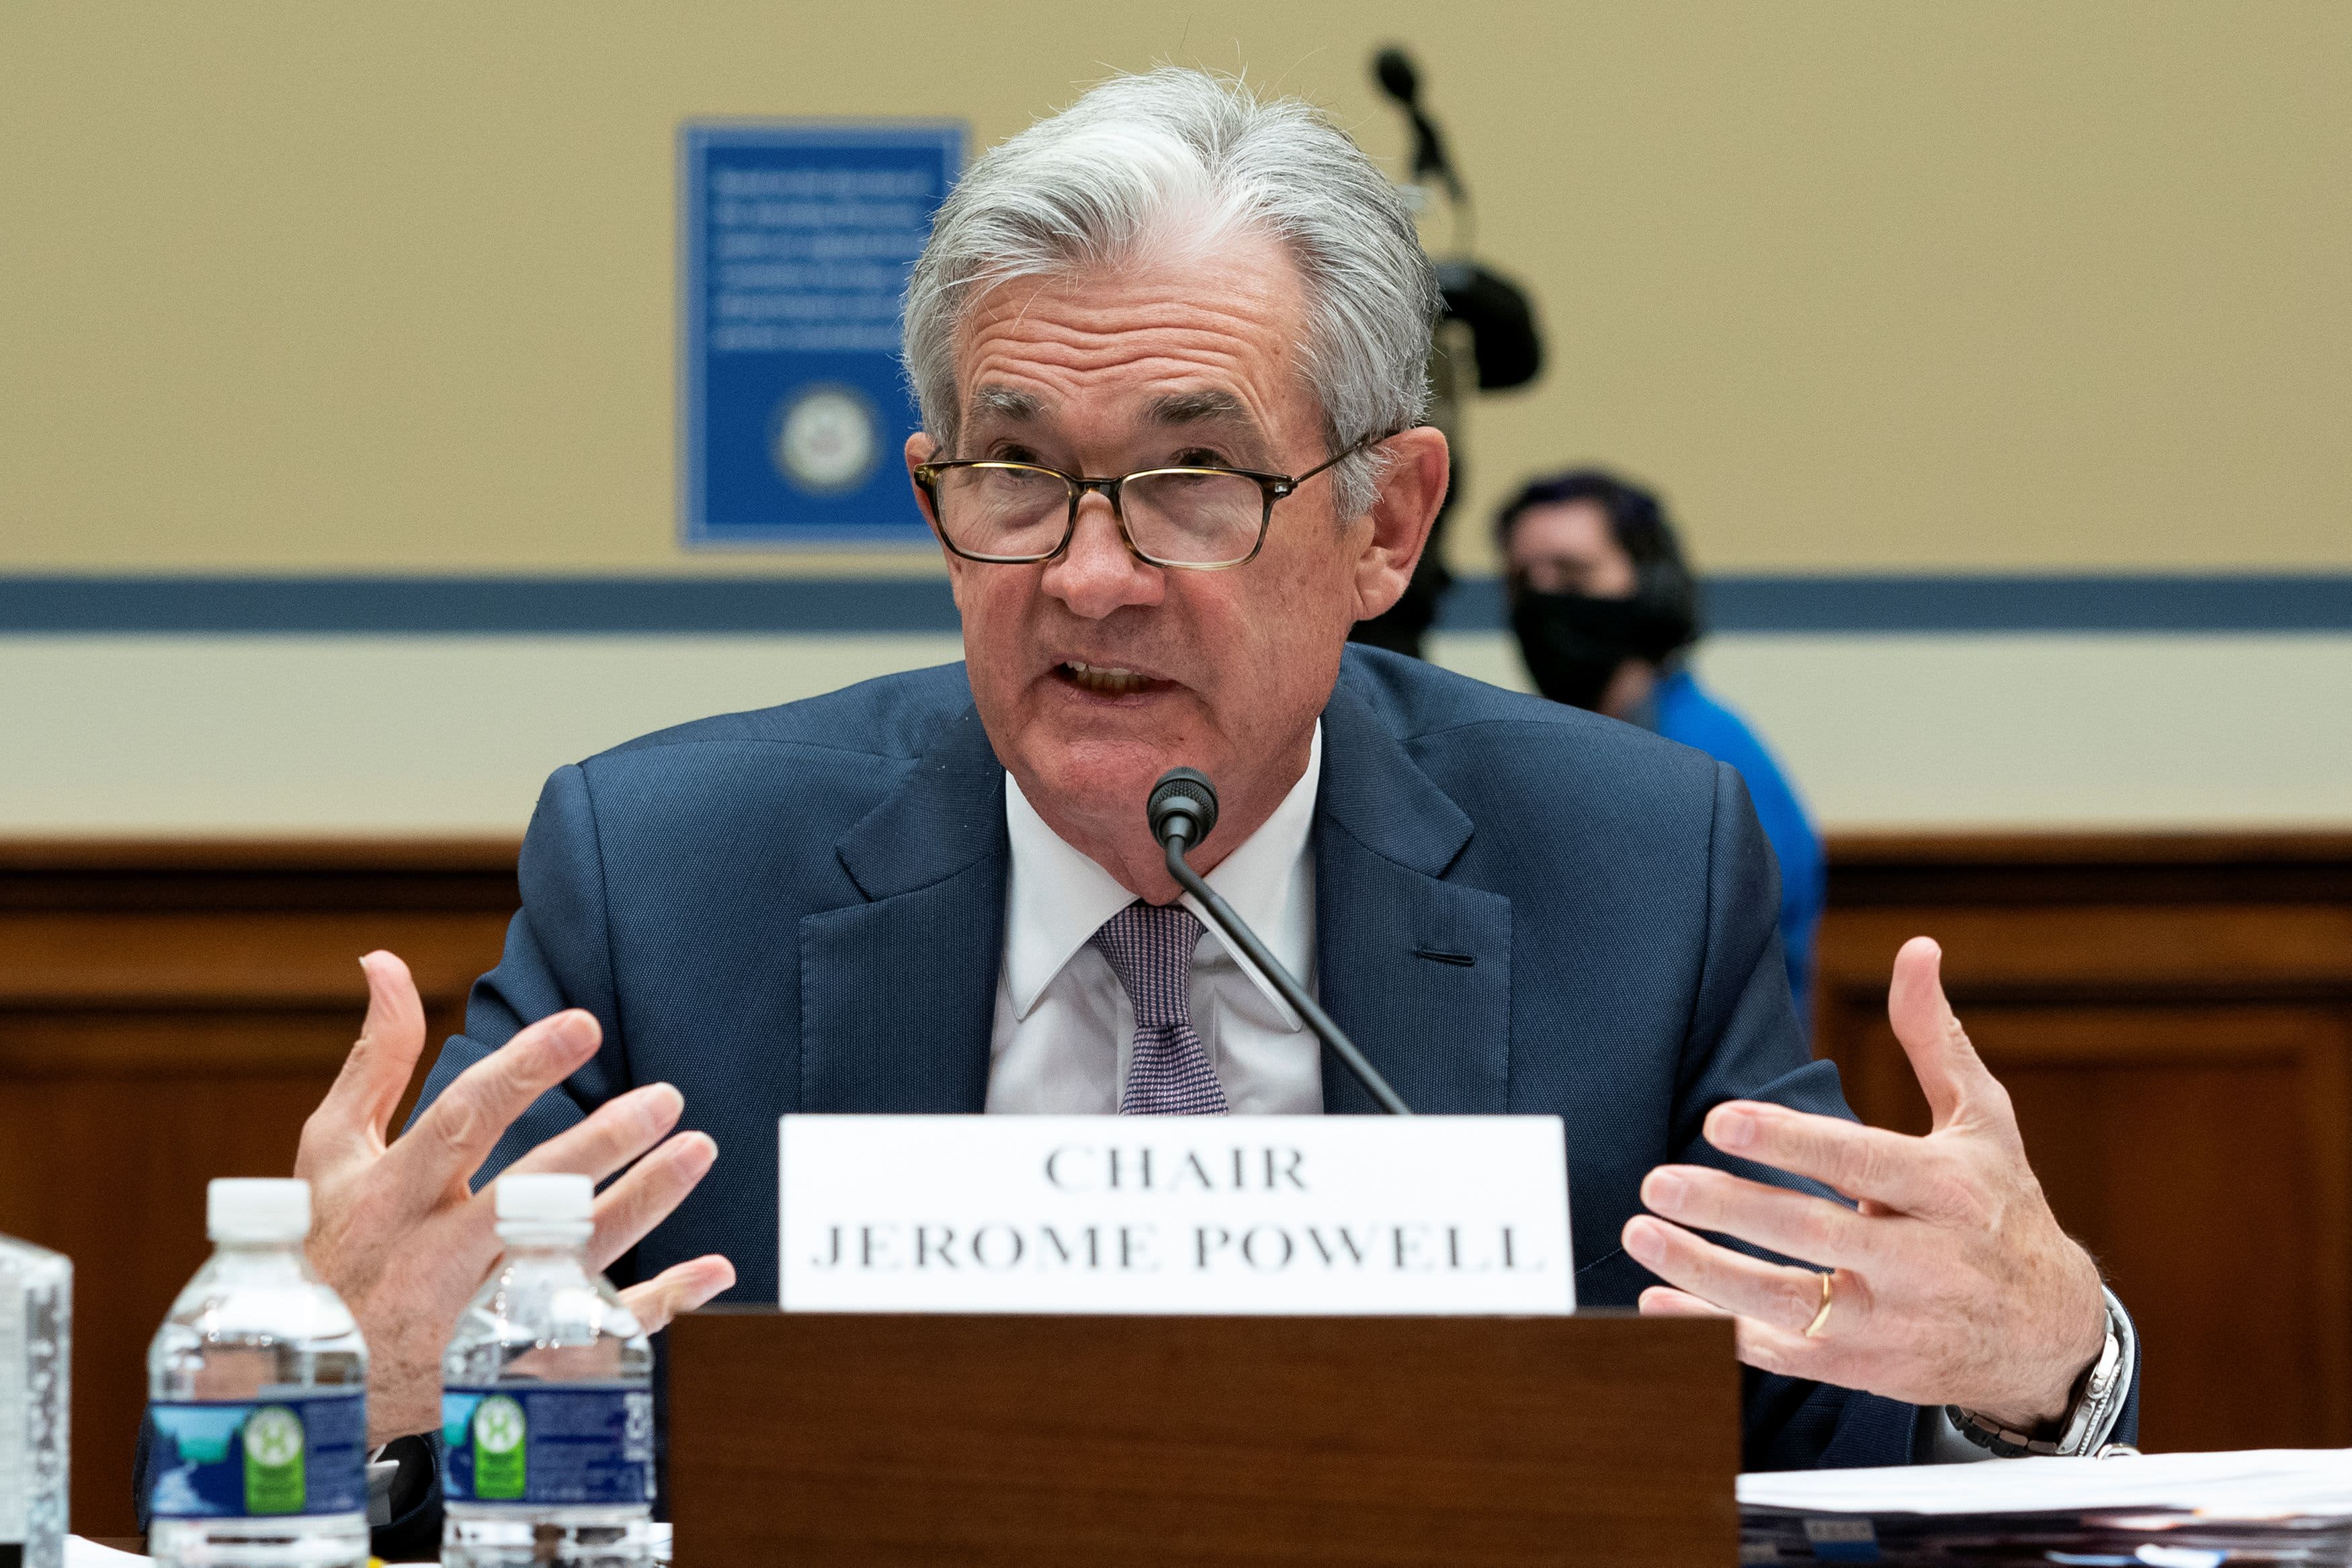 Powell notes economic improvement, but says the pandemic remains a